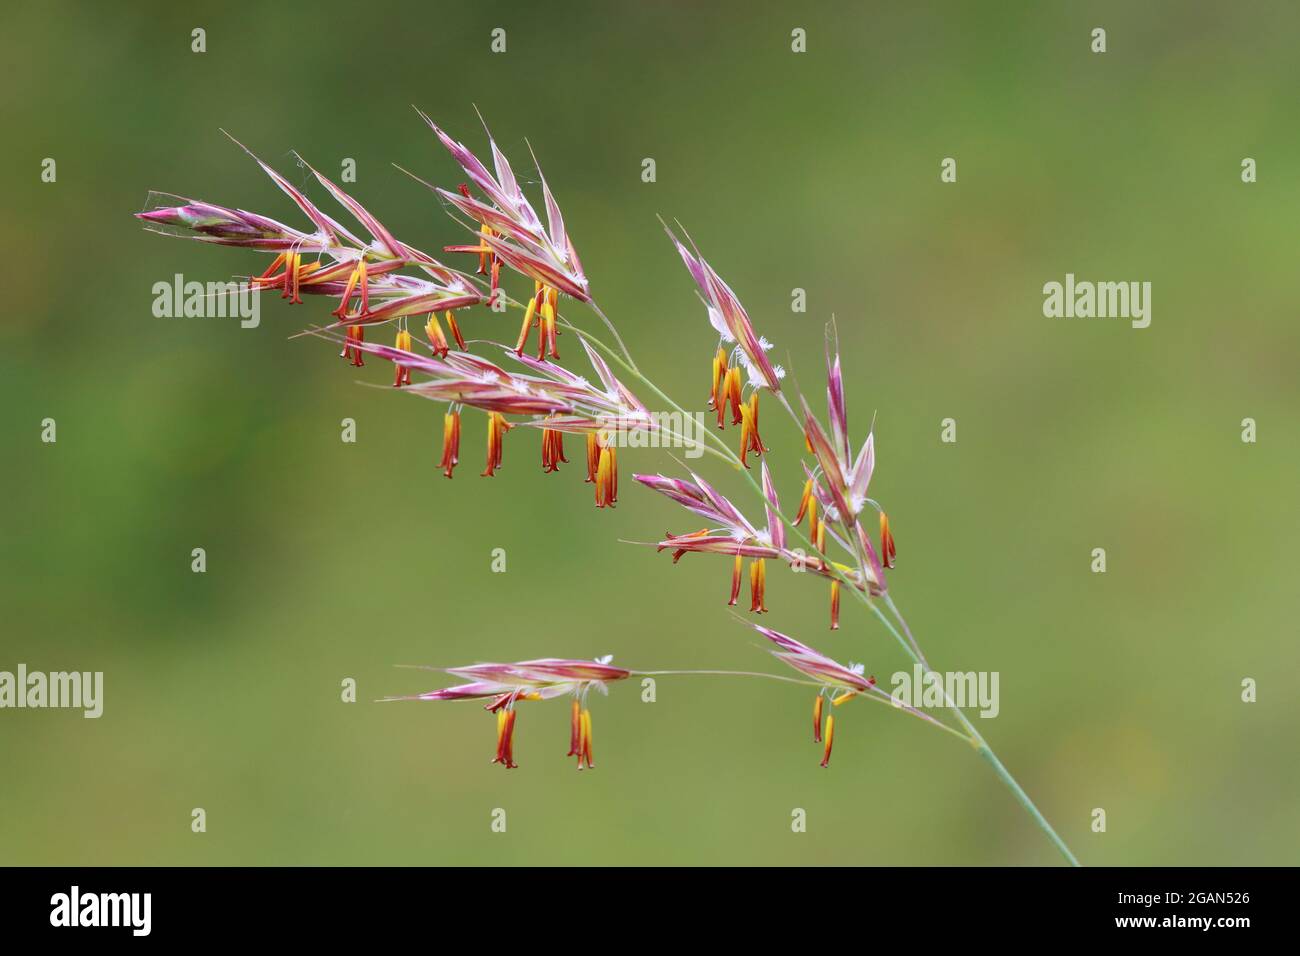 Close up image of Meadow Brome or Bromus erectus grass in a Nature reserve in County Durham, England, UK. Stock Photo